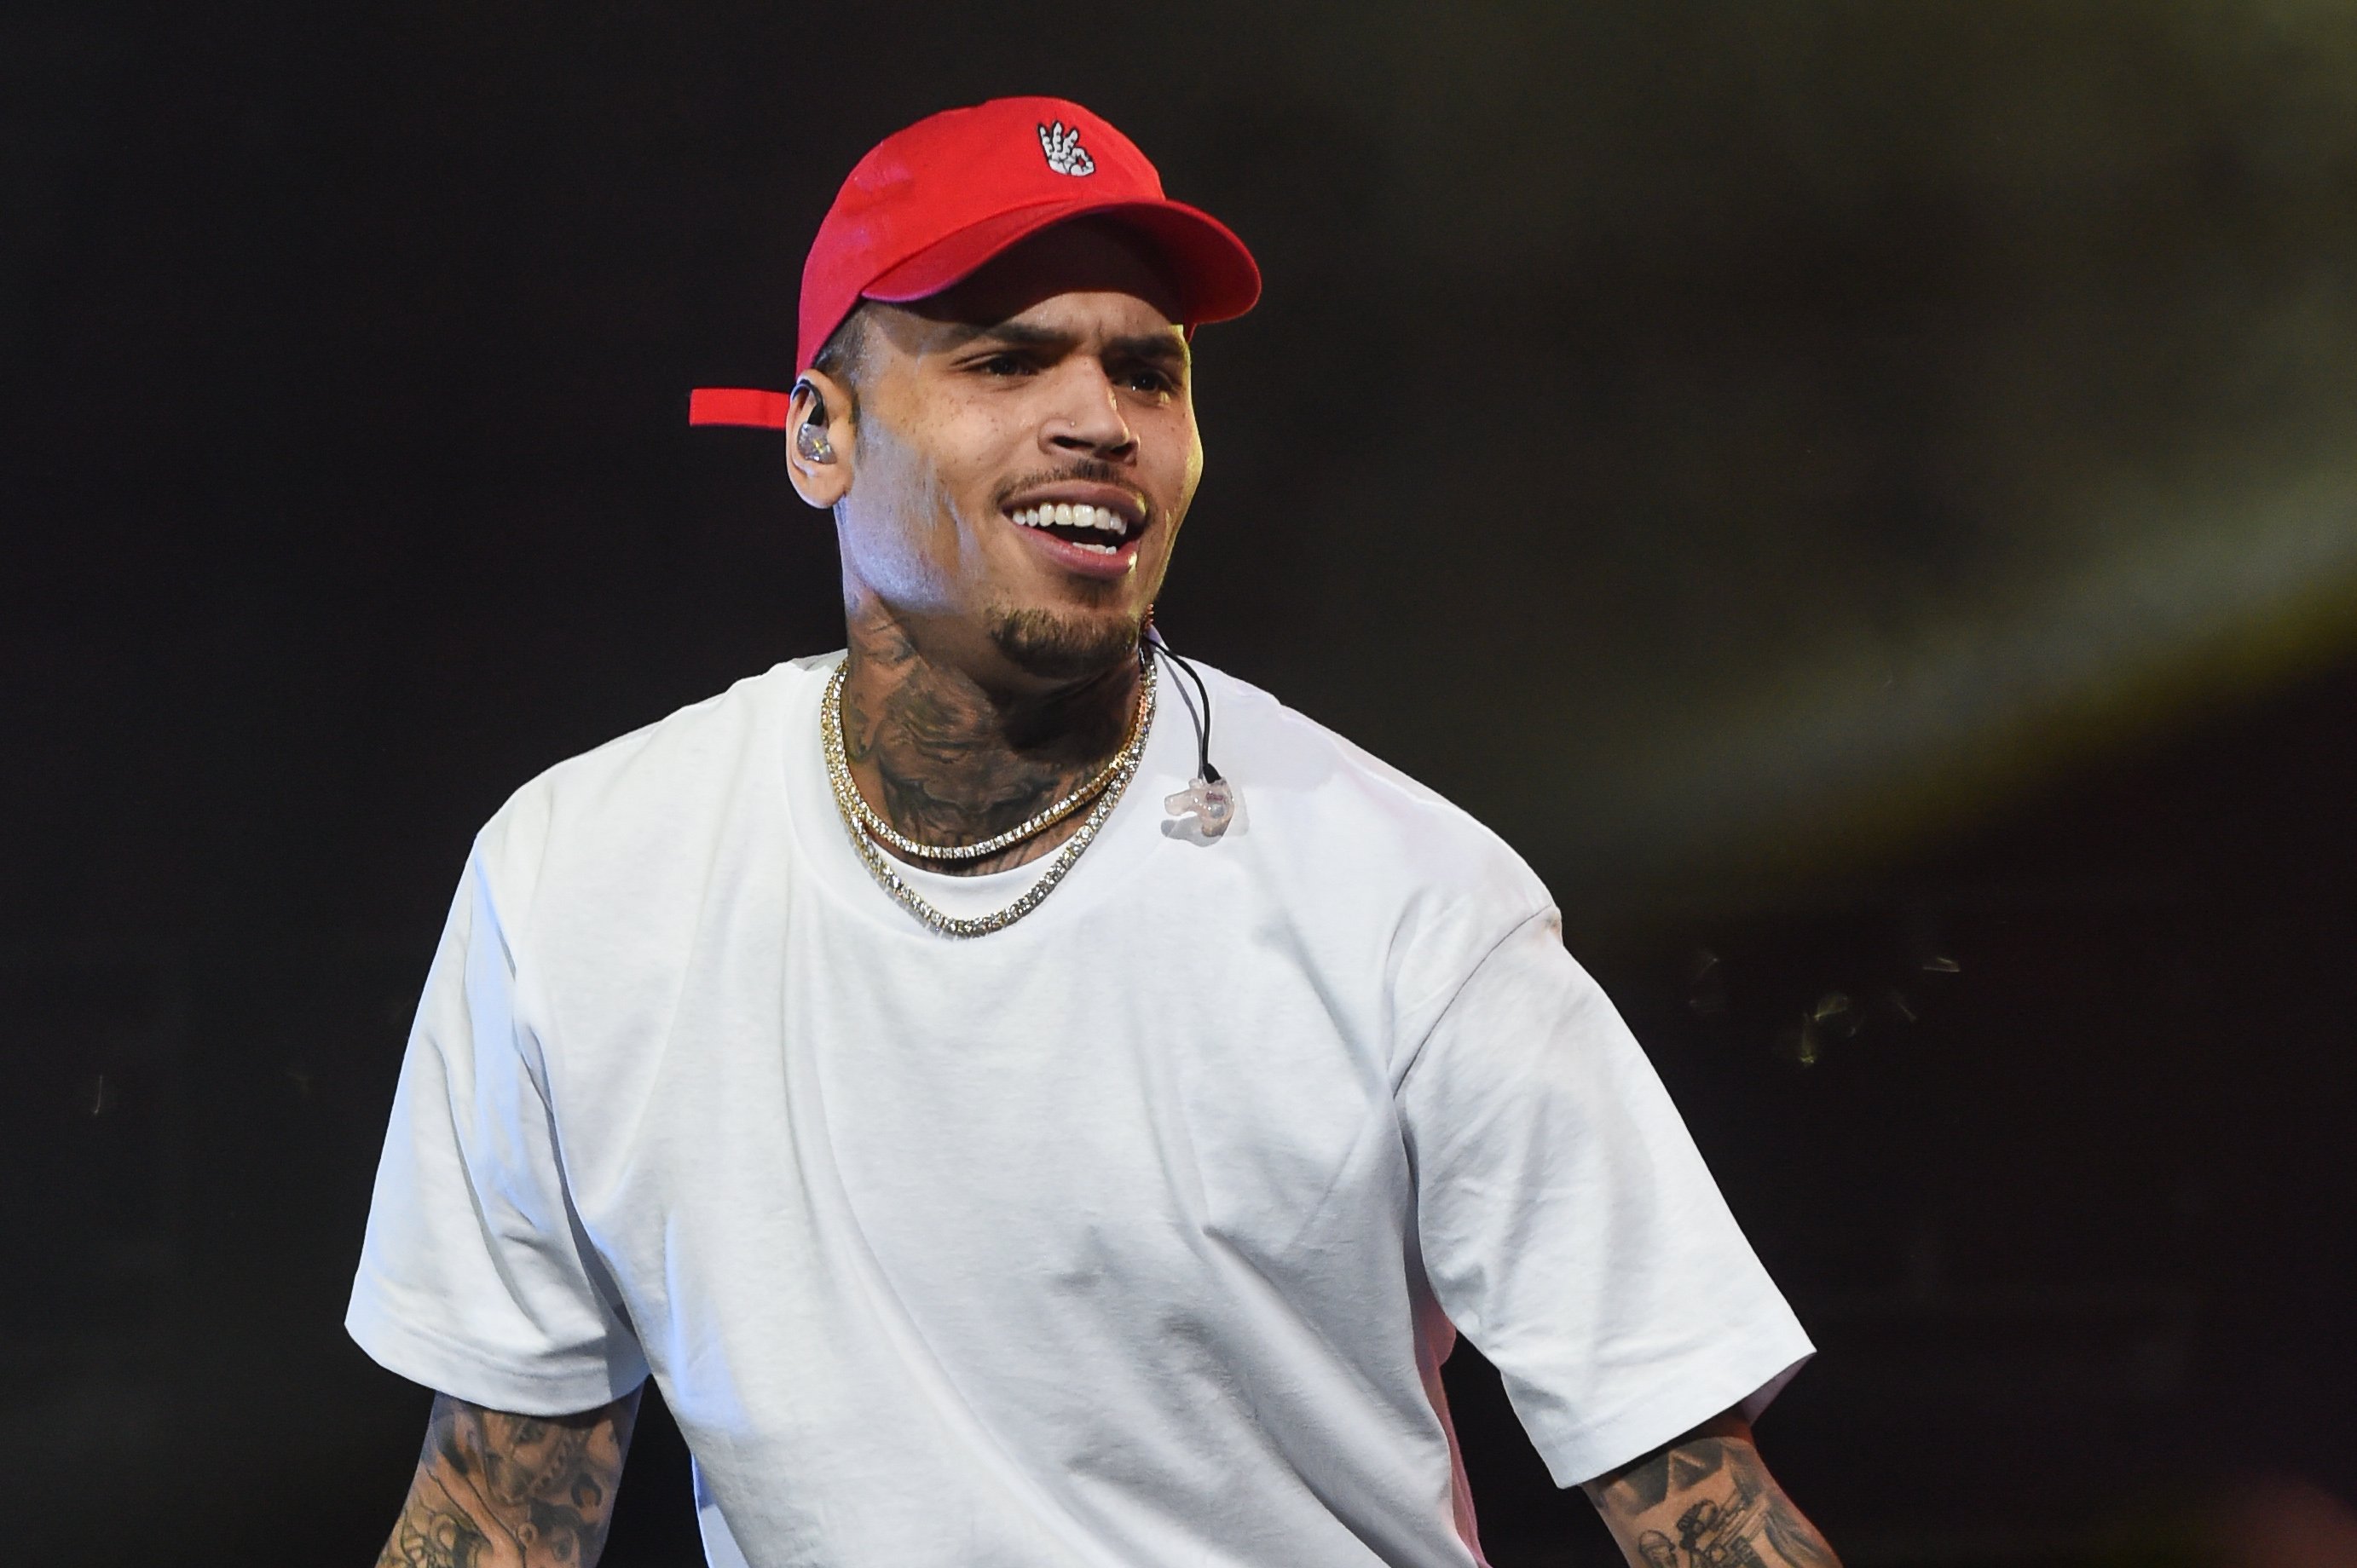  Chris Brown performs on stage at The Big Show at Little Caesars Arena on December 28, 2017 | Photo: GettyImages